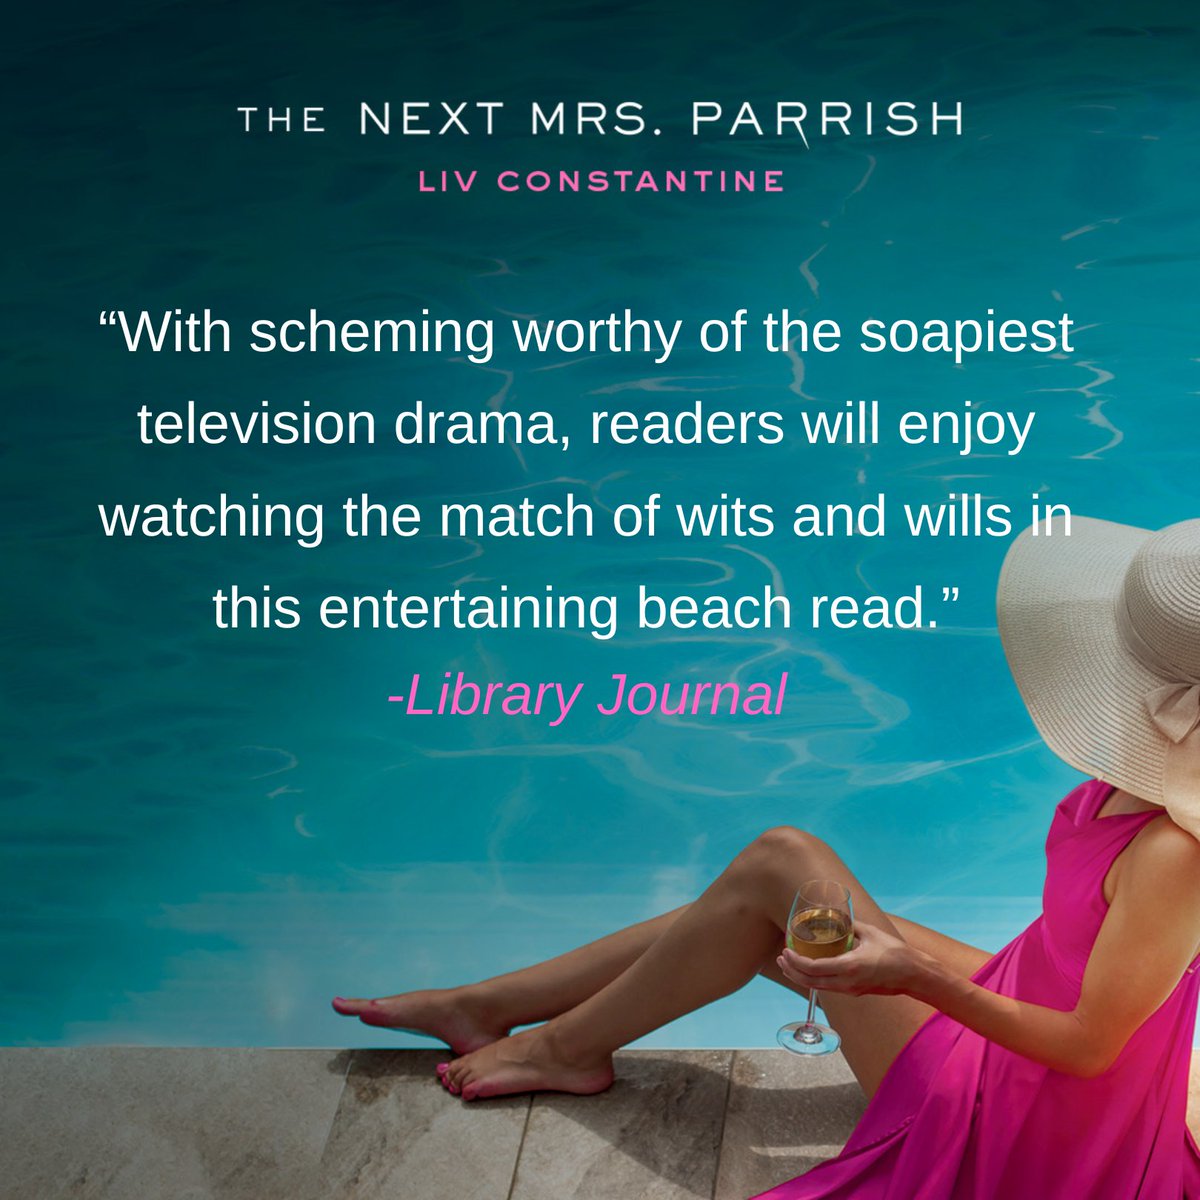 Thank you @LibraryJournal for this great review of #thenextmrsparrish Coming 6/18